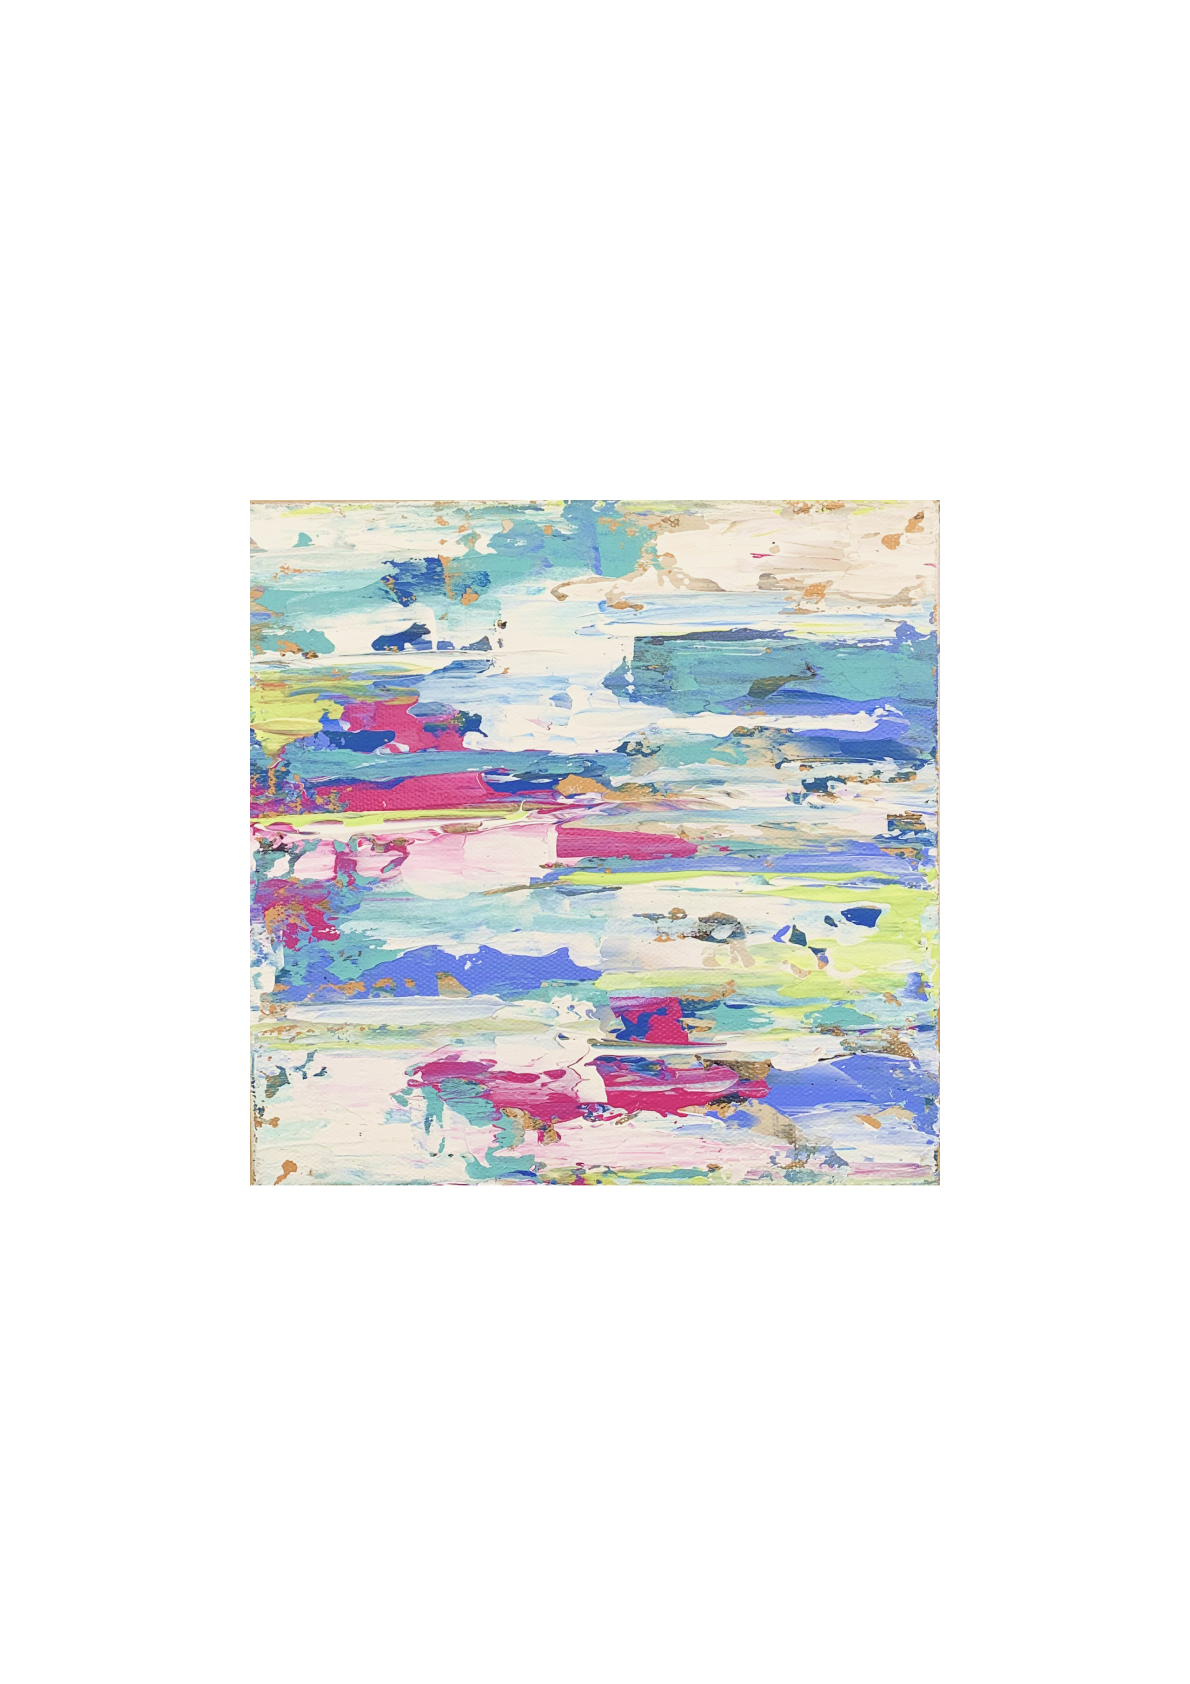 Small abstract art painting with bright colors such as blue, magenta, lime green, and teal